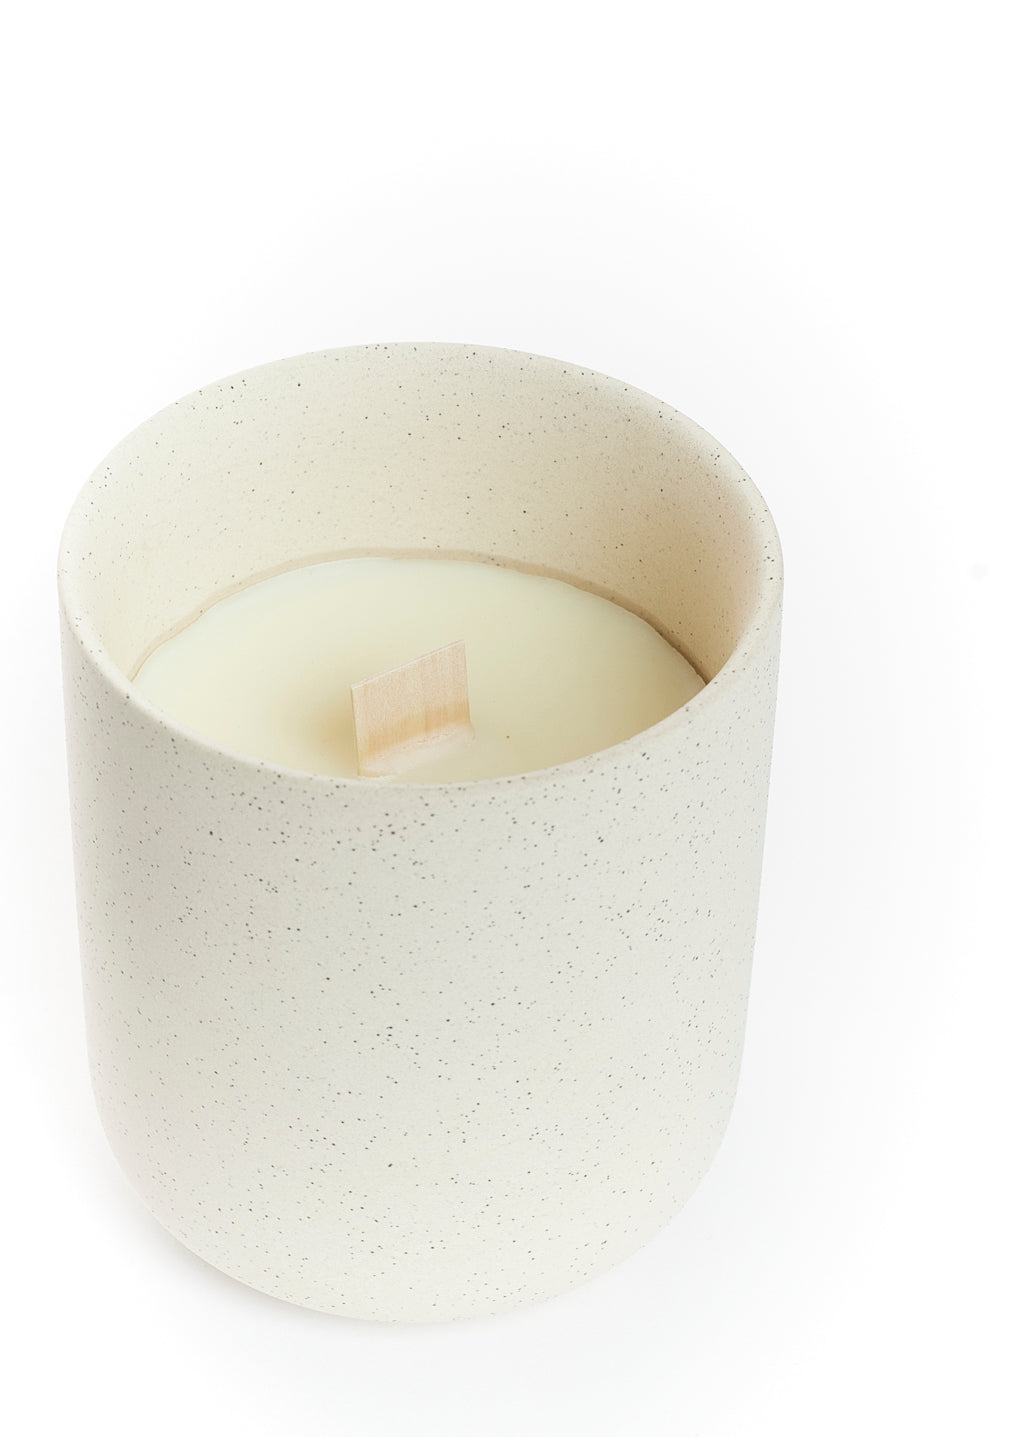 Livom Candle - Almond & Oatmilk